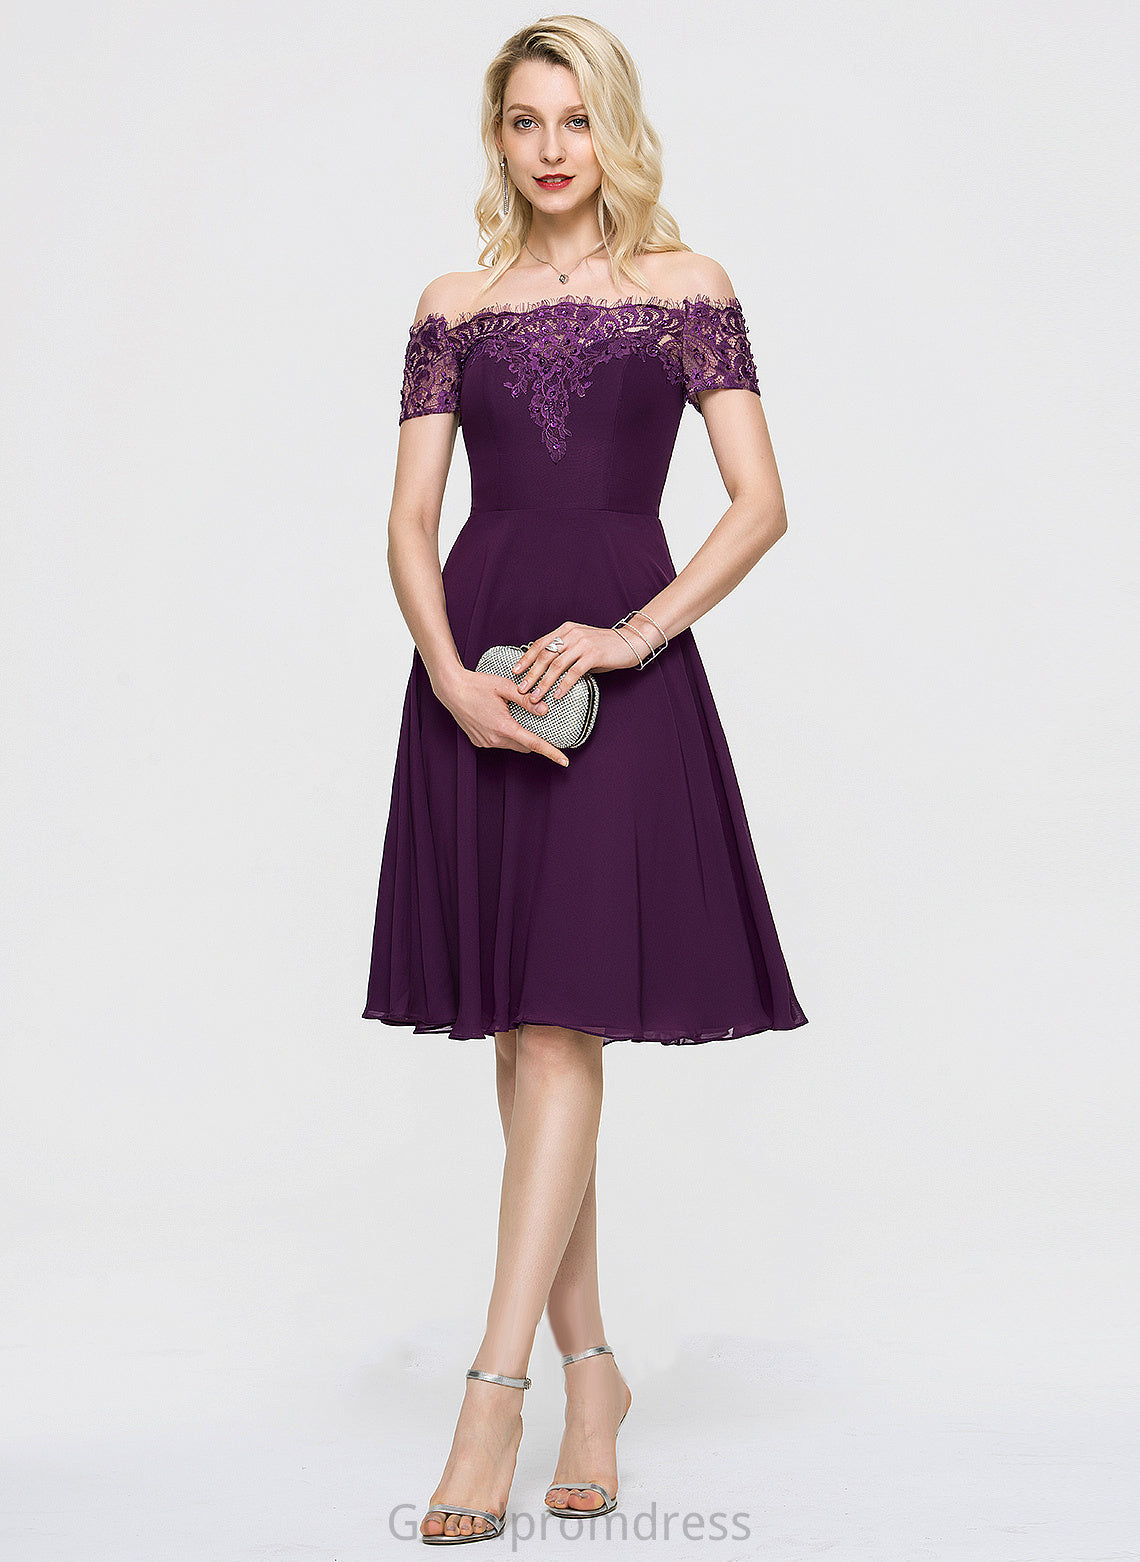 Knee-Length Chiffon With Homecoming Dresses Off-the-Shoulder Jode Homecoming Lace Beading Dress A-Line